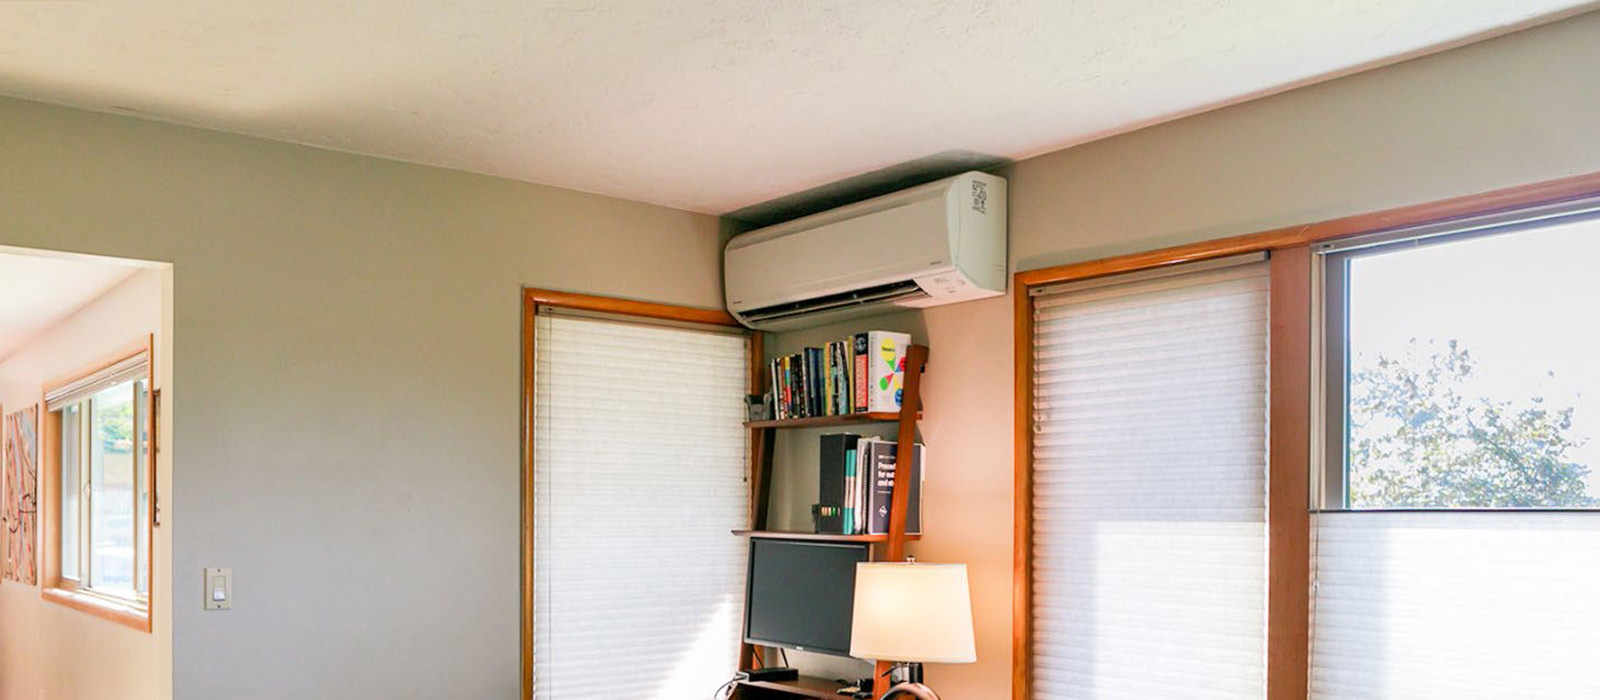 Heat pump above a computer and bookshelf with a newly installed thermostat